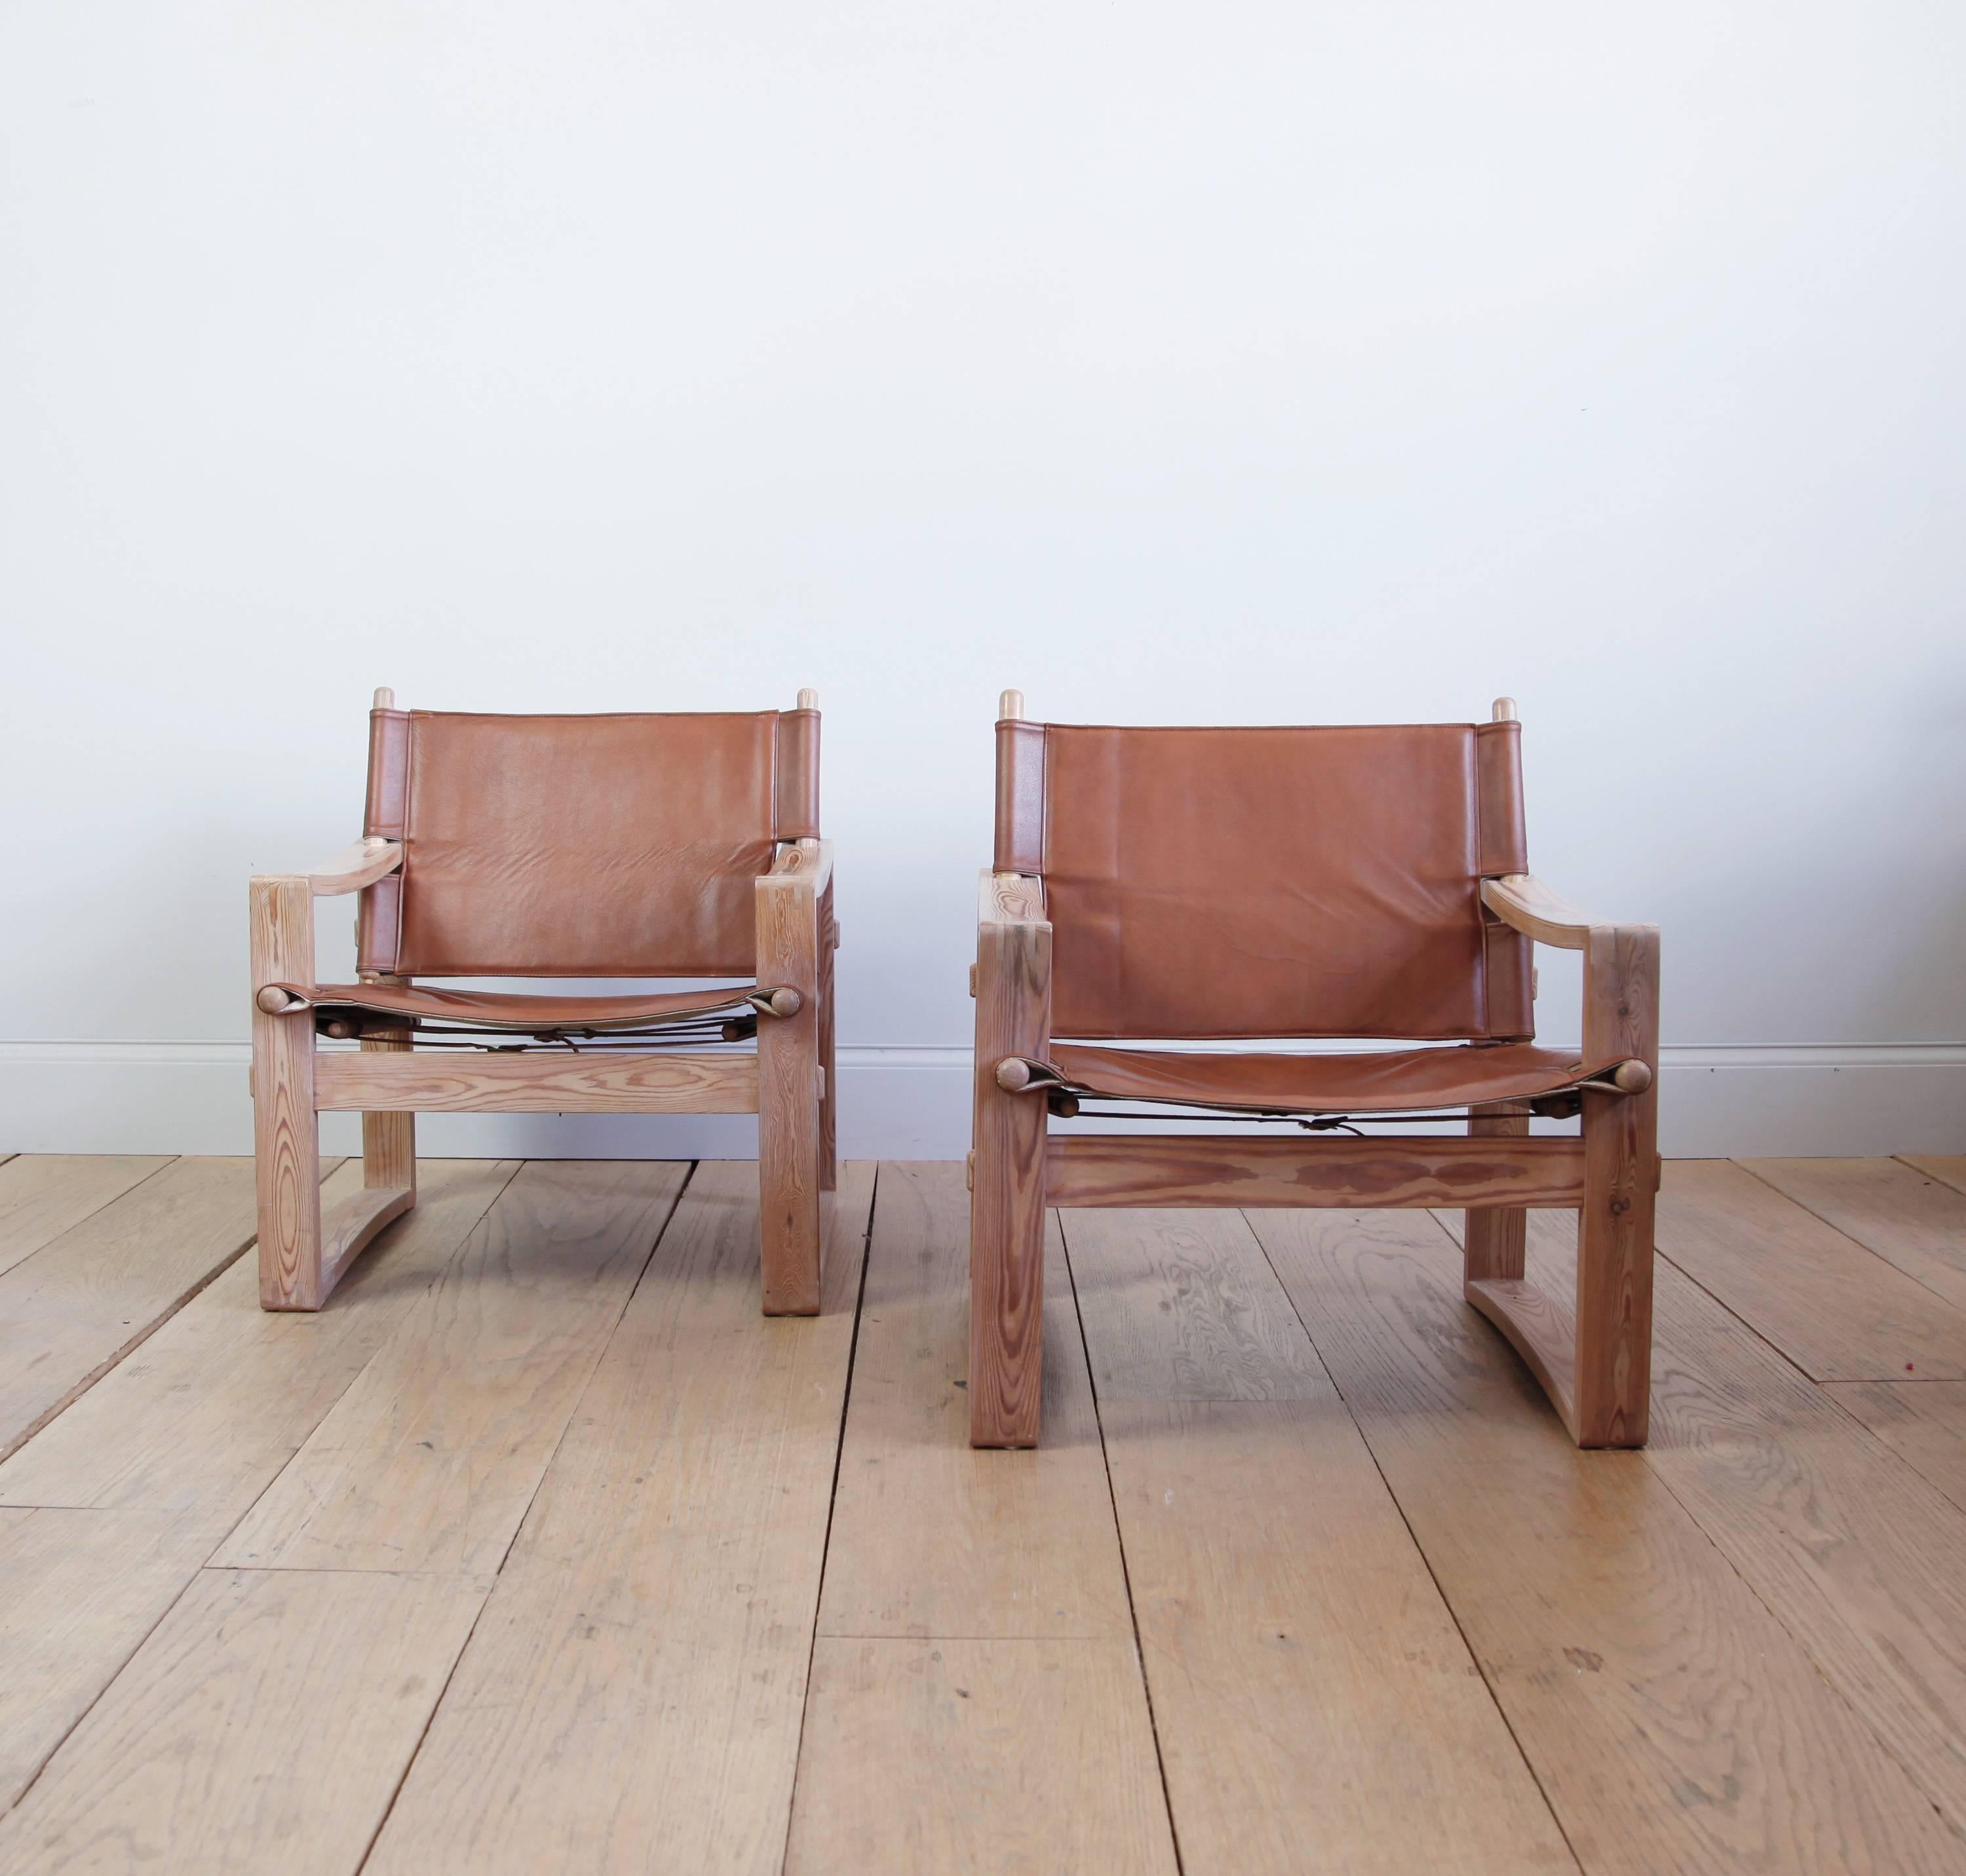 These Danish chairs from the 1970s are deceptively simple. The joinery of the wood frame is marvellous, as is the surface treatment of the wood itself which allows the grain to speak so beautifully. We like the subtle bow of the arms. Also, unlike a